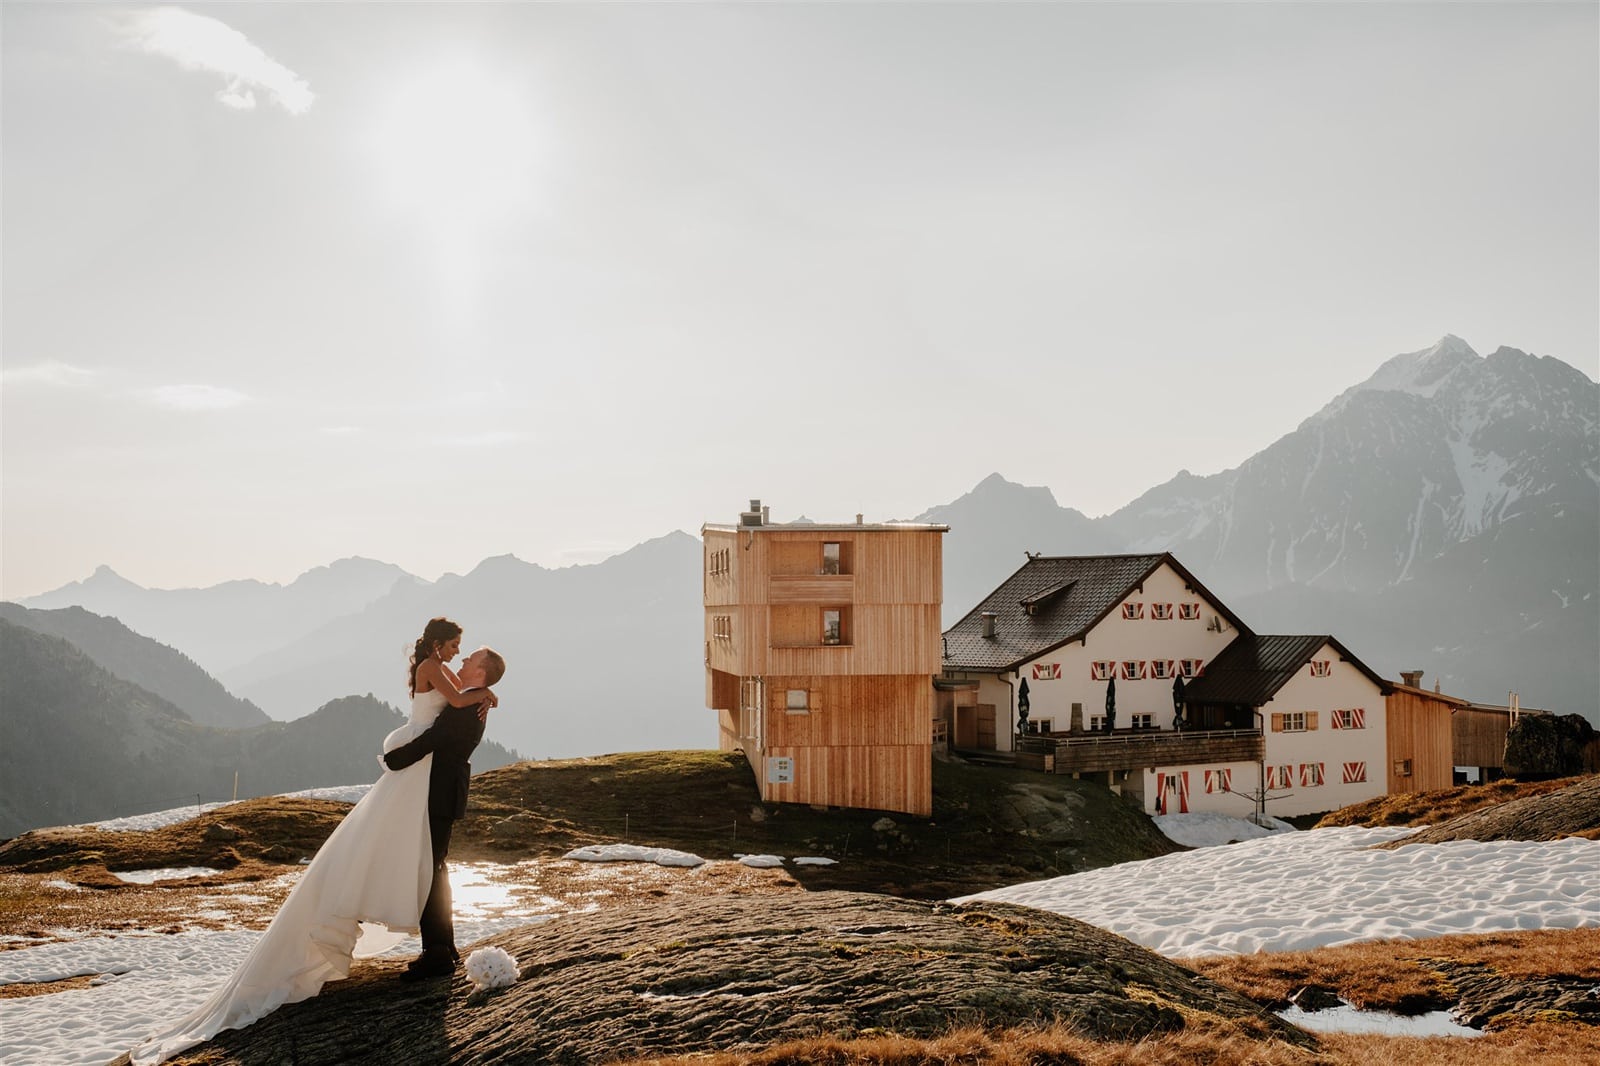 Bride and groom embrace in front of a mountain hut in the Austrian Alps